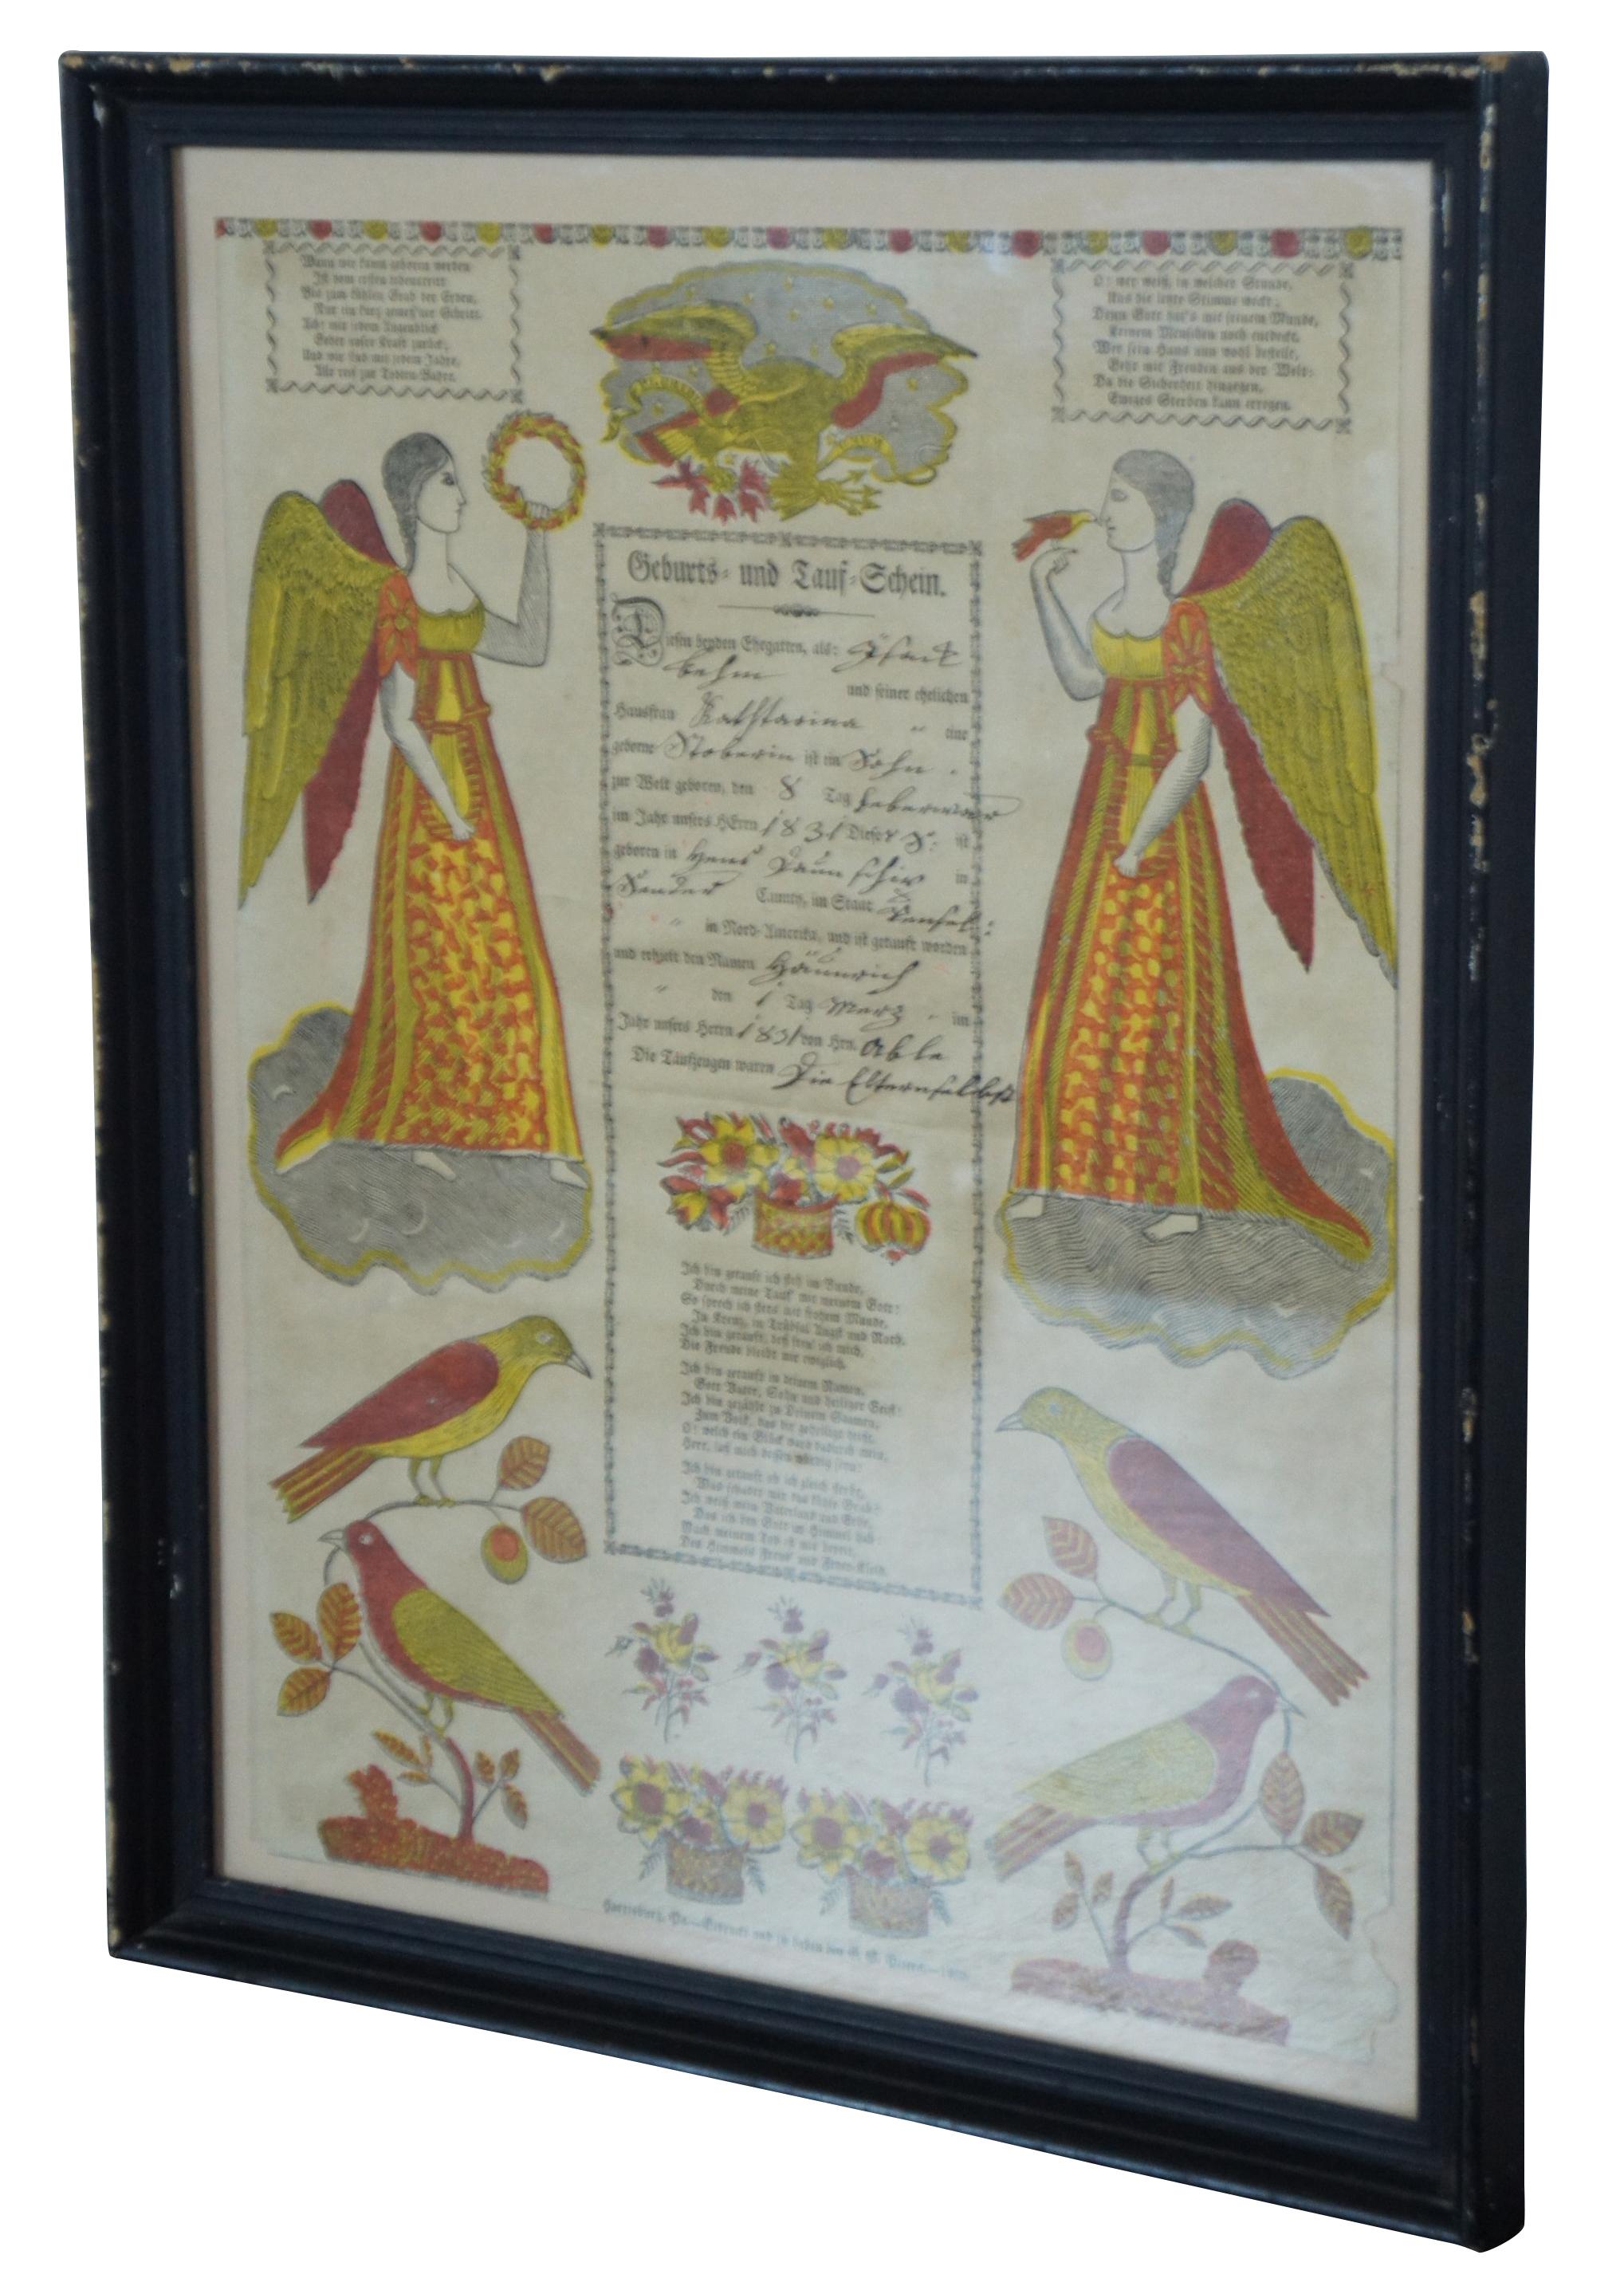 Antique German / “Pennsylvania Dutch” Birth and Baptismal Certificate lithograph with color block printing in red and yellow, printed in 1830 and signed in 1831.

Measures: 14” x 1” x 17” / Sans Frame - 11.5” x 14.5” (Width x Depth x Height).